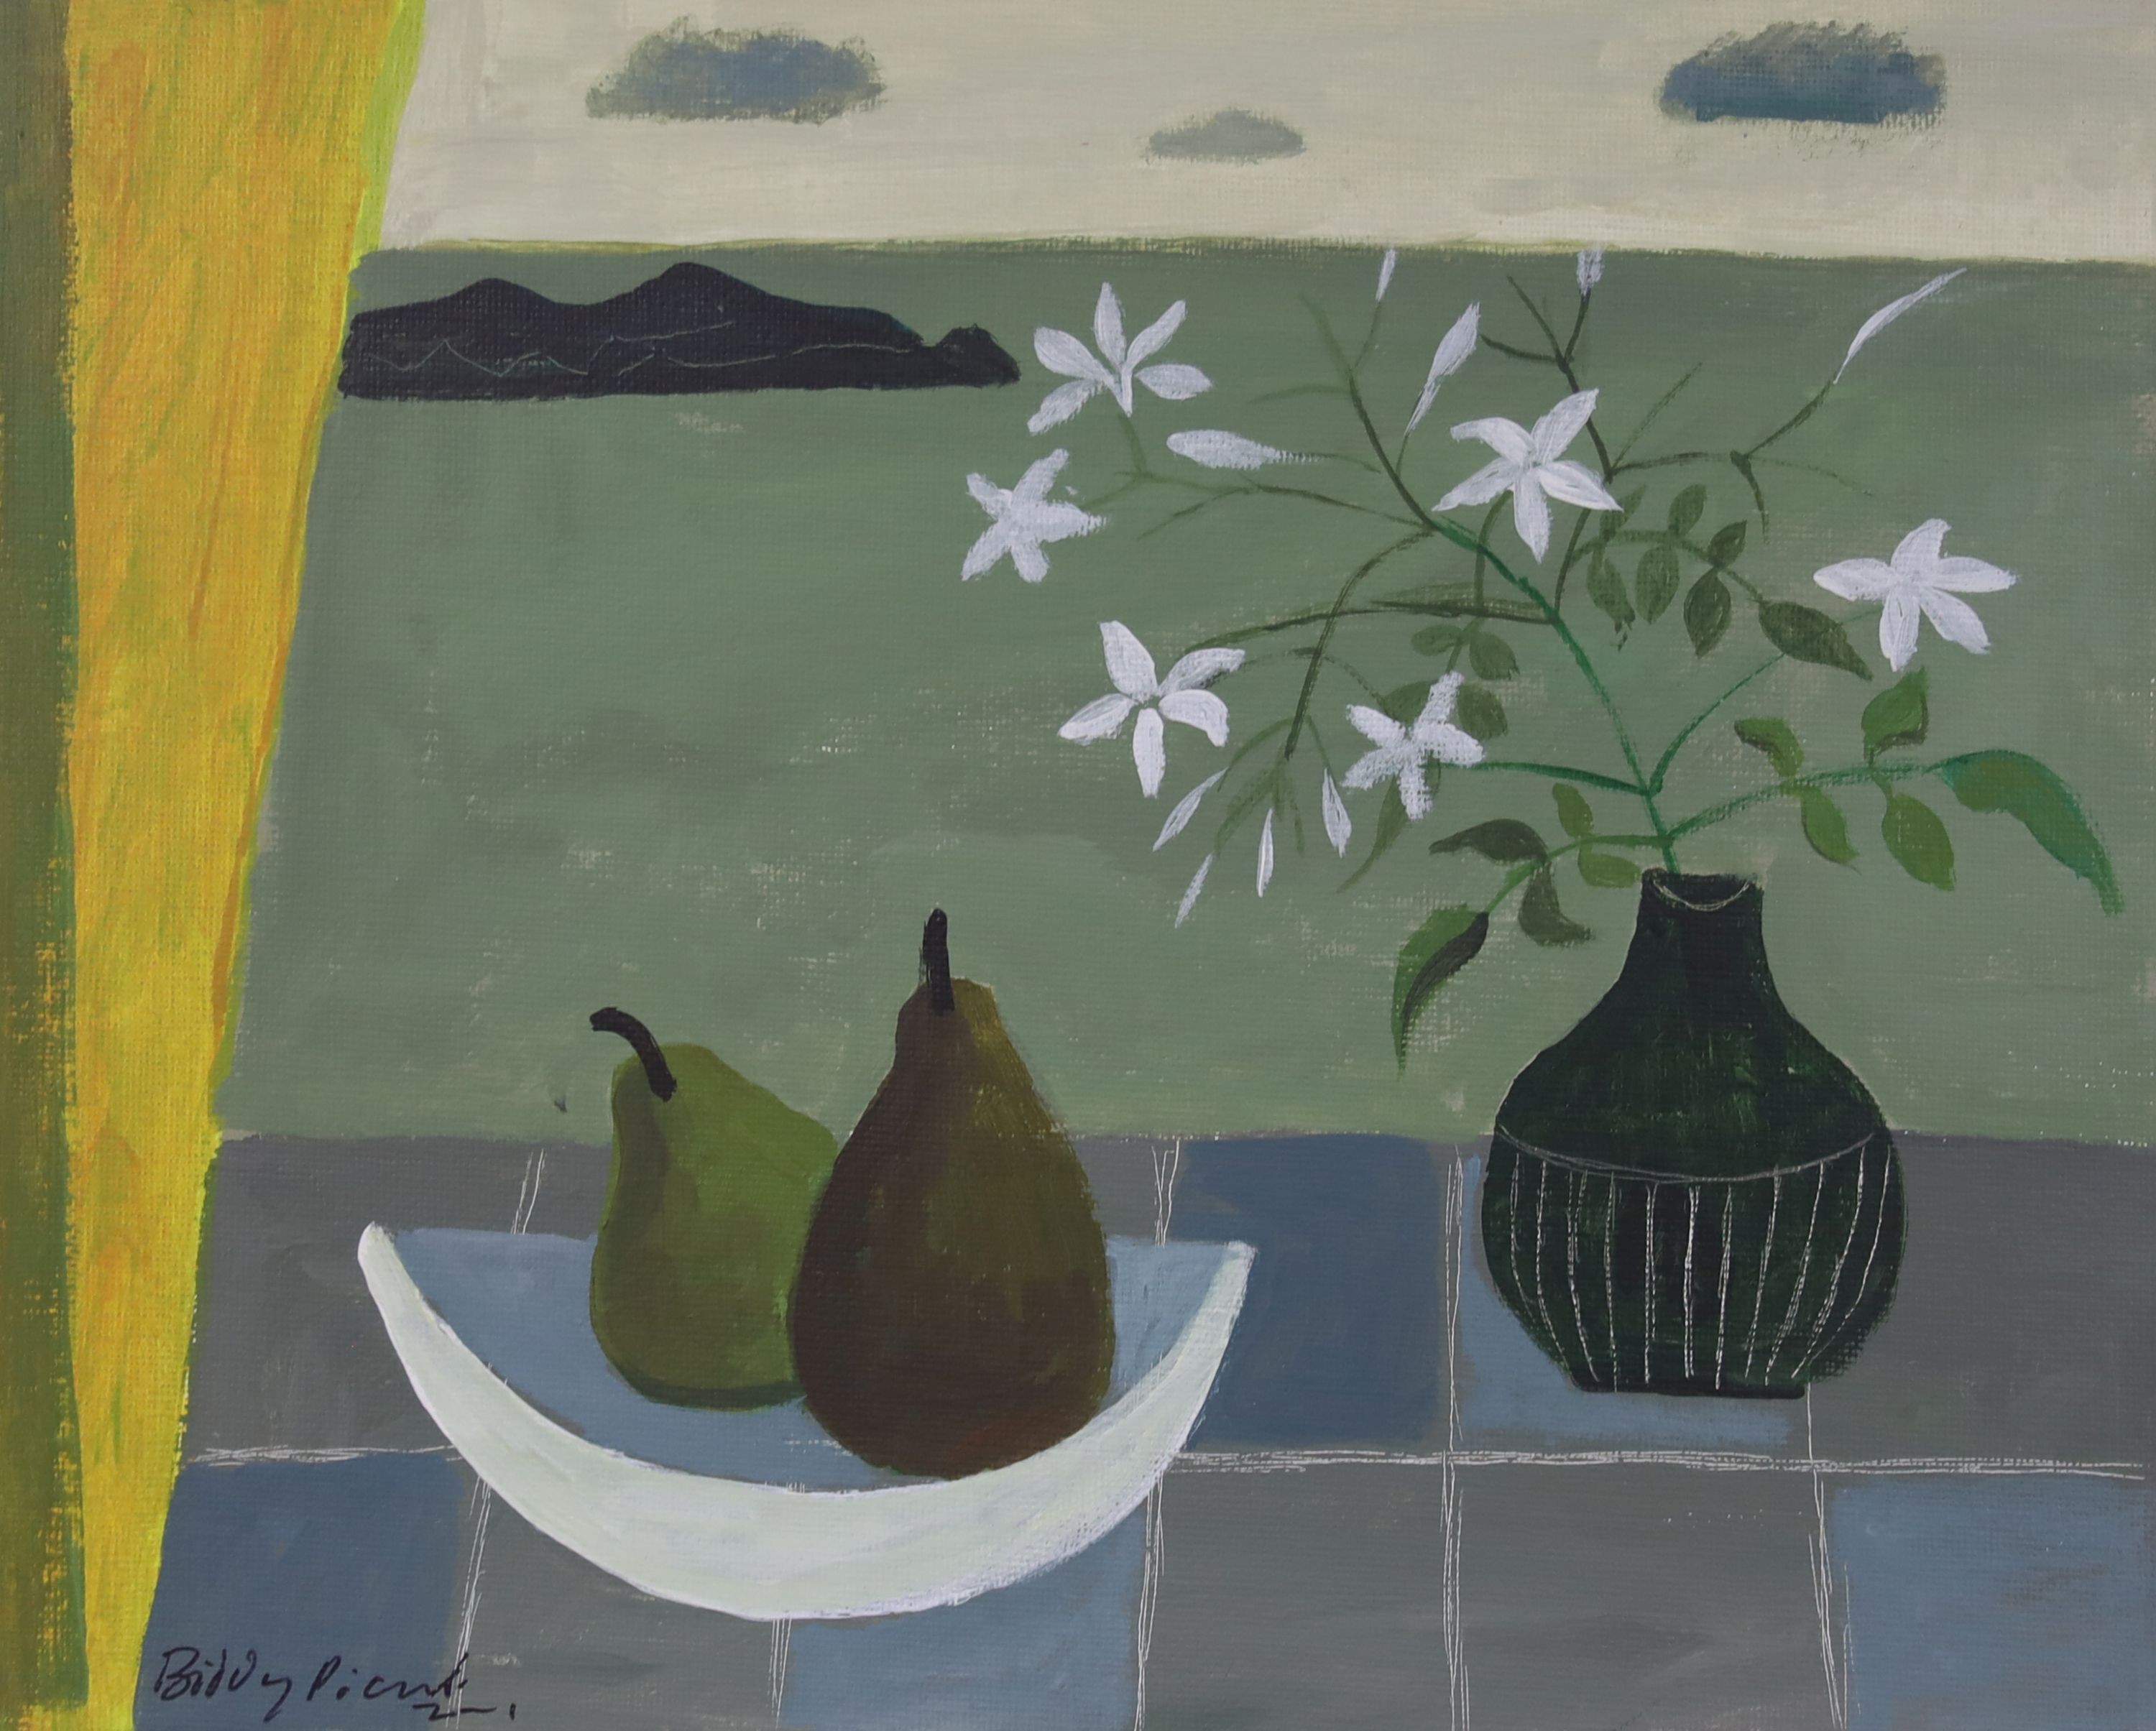 Biddy Picard (1922-), oil on board, 'Jasmine Flowers', signed and inscribed verso, 24 x 30cm